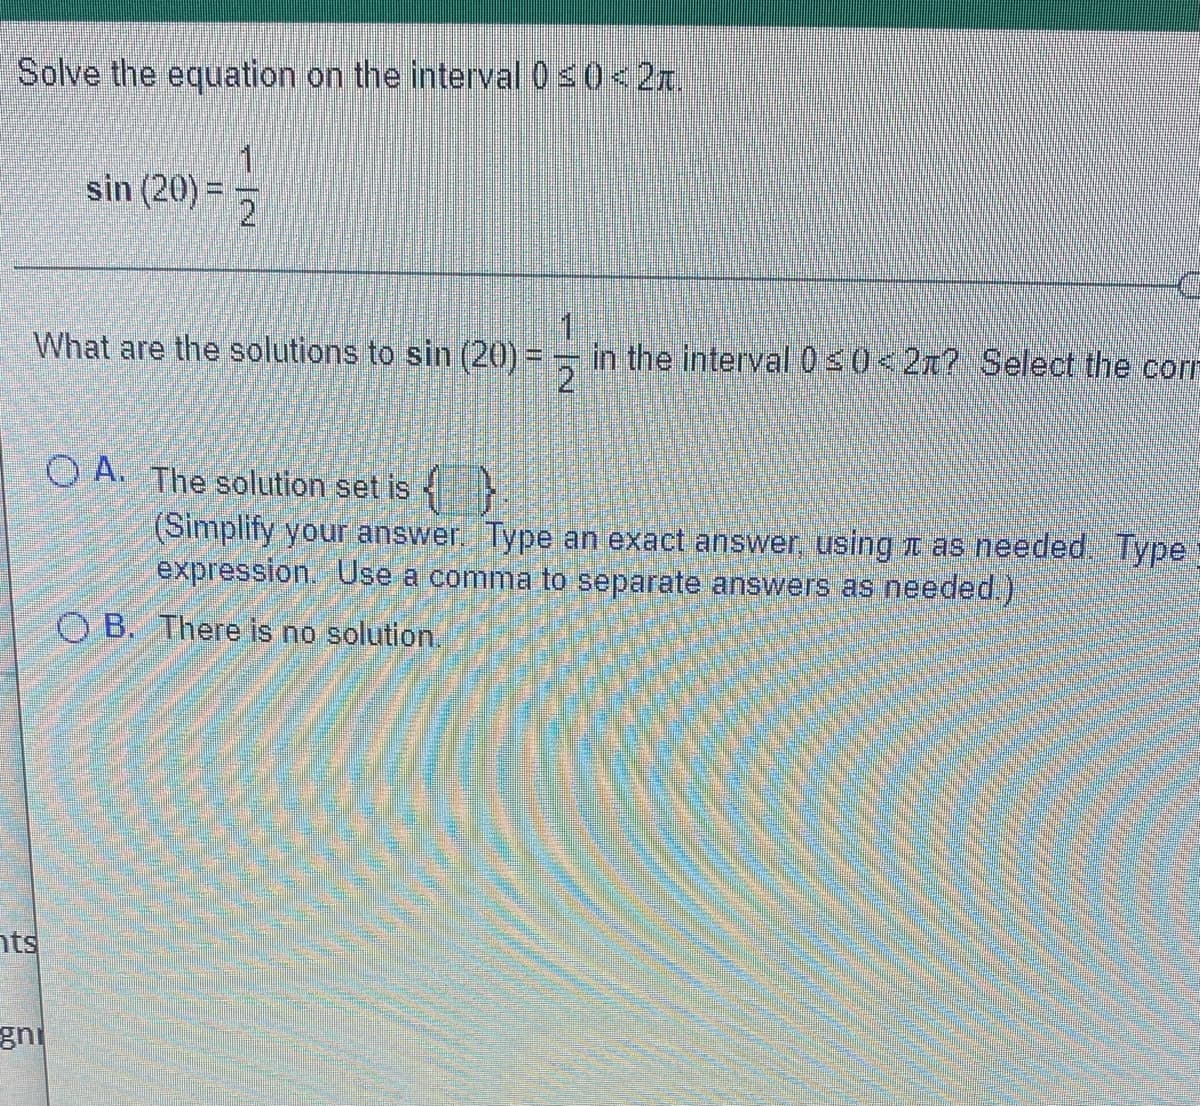 Solve the equation on the interval 0s0<2x.
sin (20) =
1
in the interval030<2x? Select the corn
2
What are the solutions to sin (20) =
O A. The solution set is
(Simplify your answer. Type an exact answer, using t as needed. Type
expression. Use a comma to separate answers as needed.)
O B. There is no solution.
nts
gni
